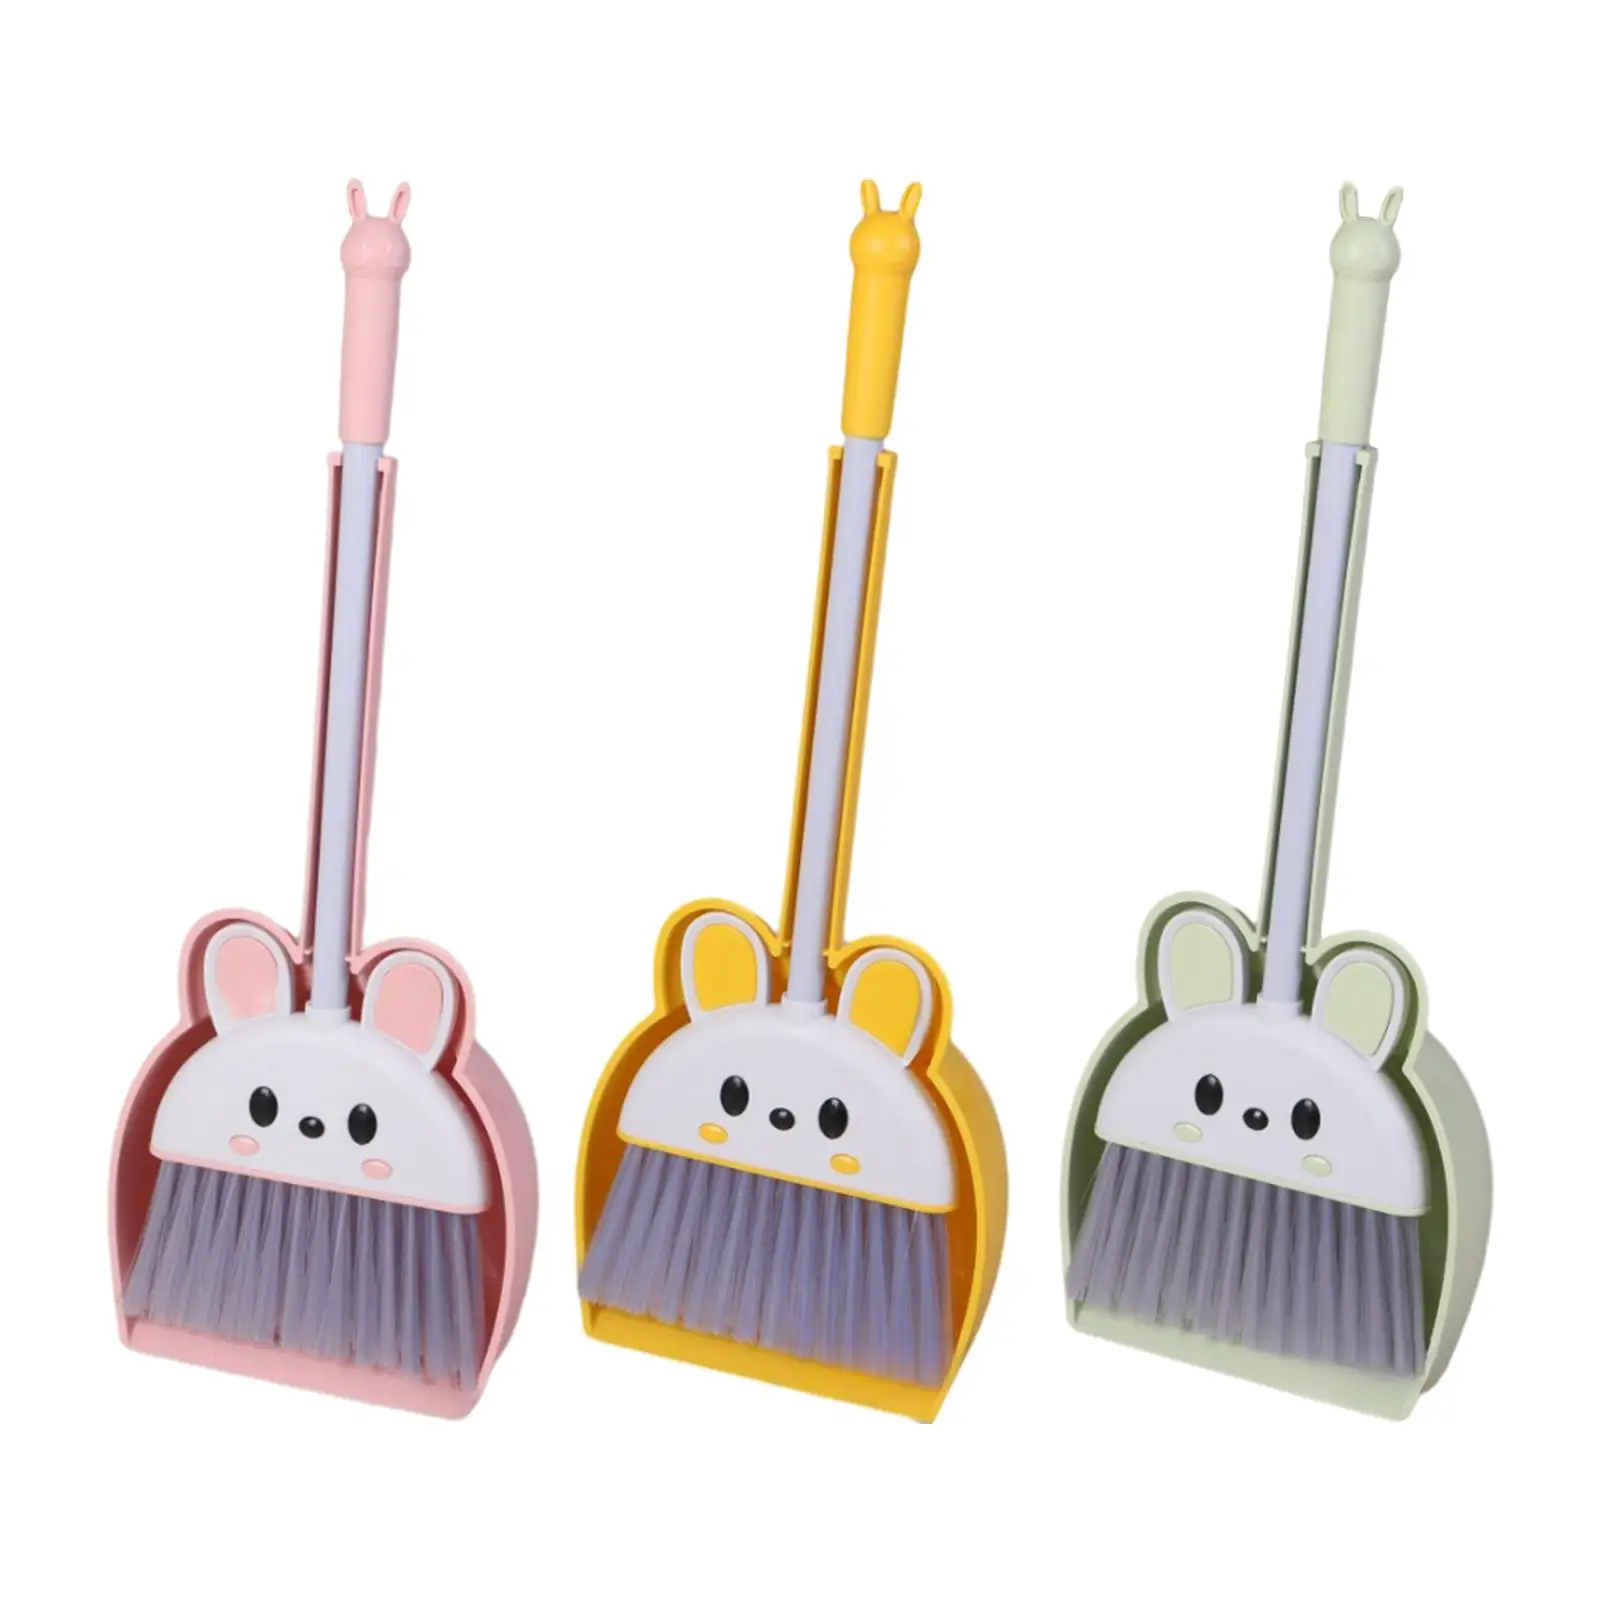 Kids Cleaning Set Educational Role Playing Mini Broom and Dustpan Set for Kids for Preschool Kindergarten Age 3-6 Years Old